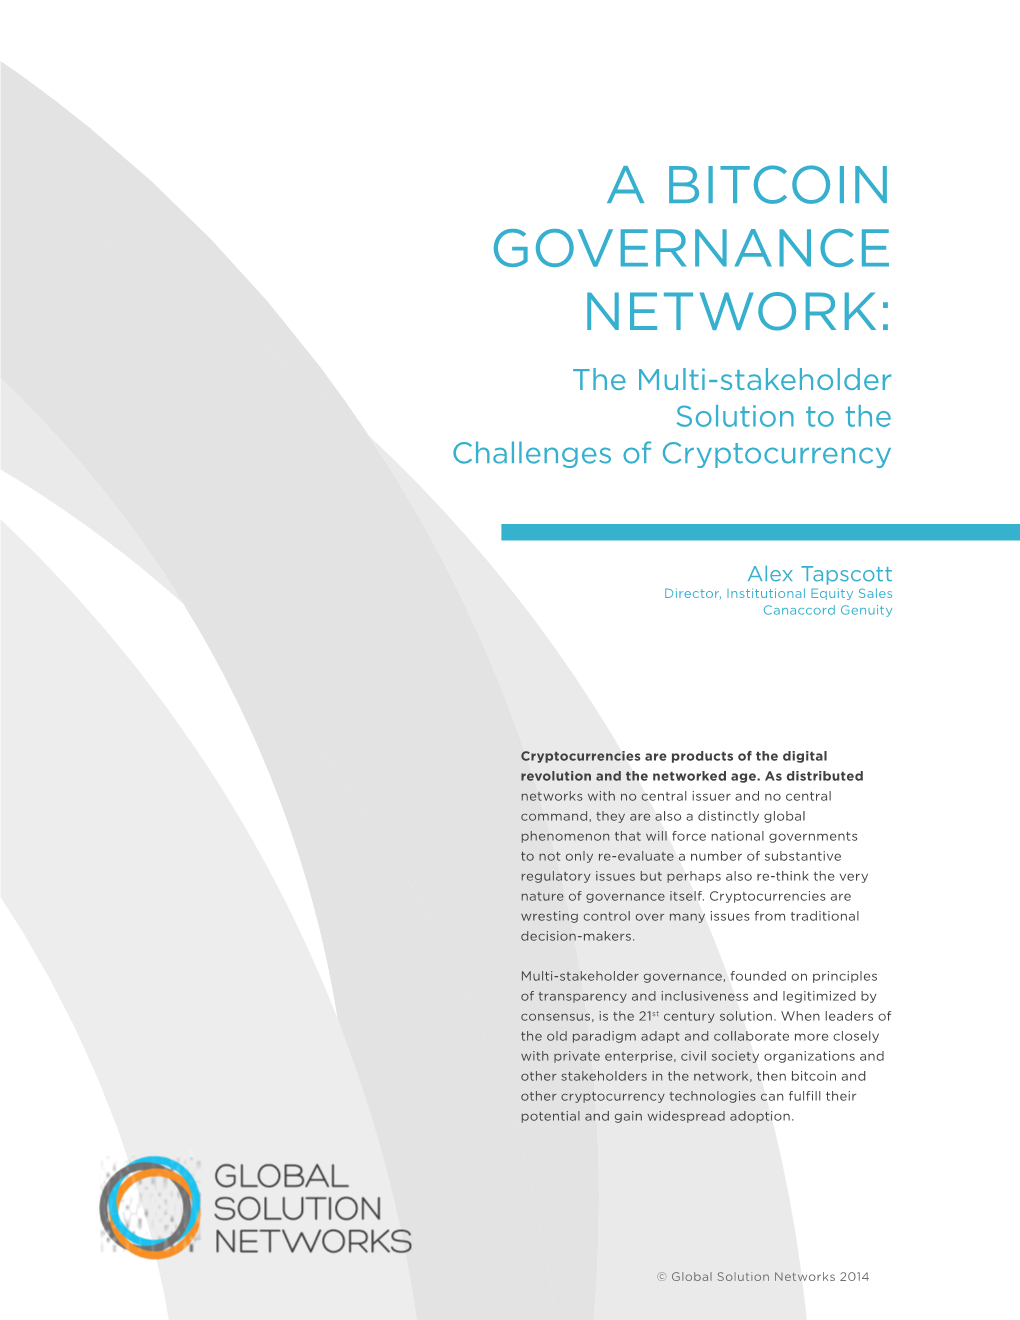 A Bitcoin Governance Network: the Multi-Stakeholder Solution to the Challenges of Cryptocurrency